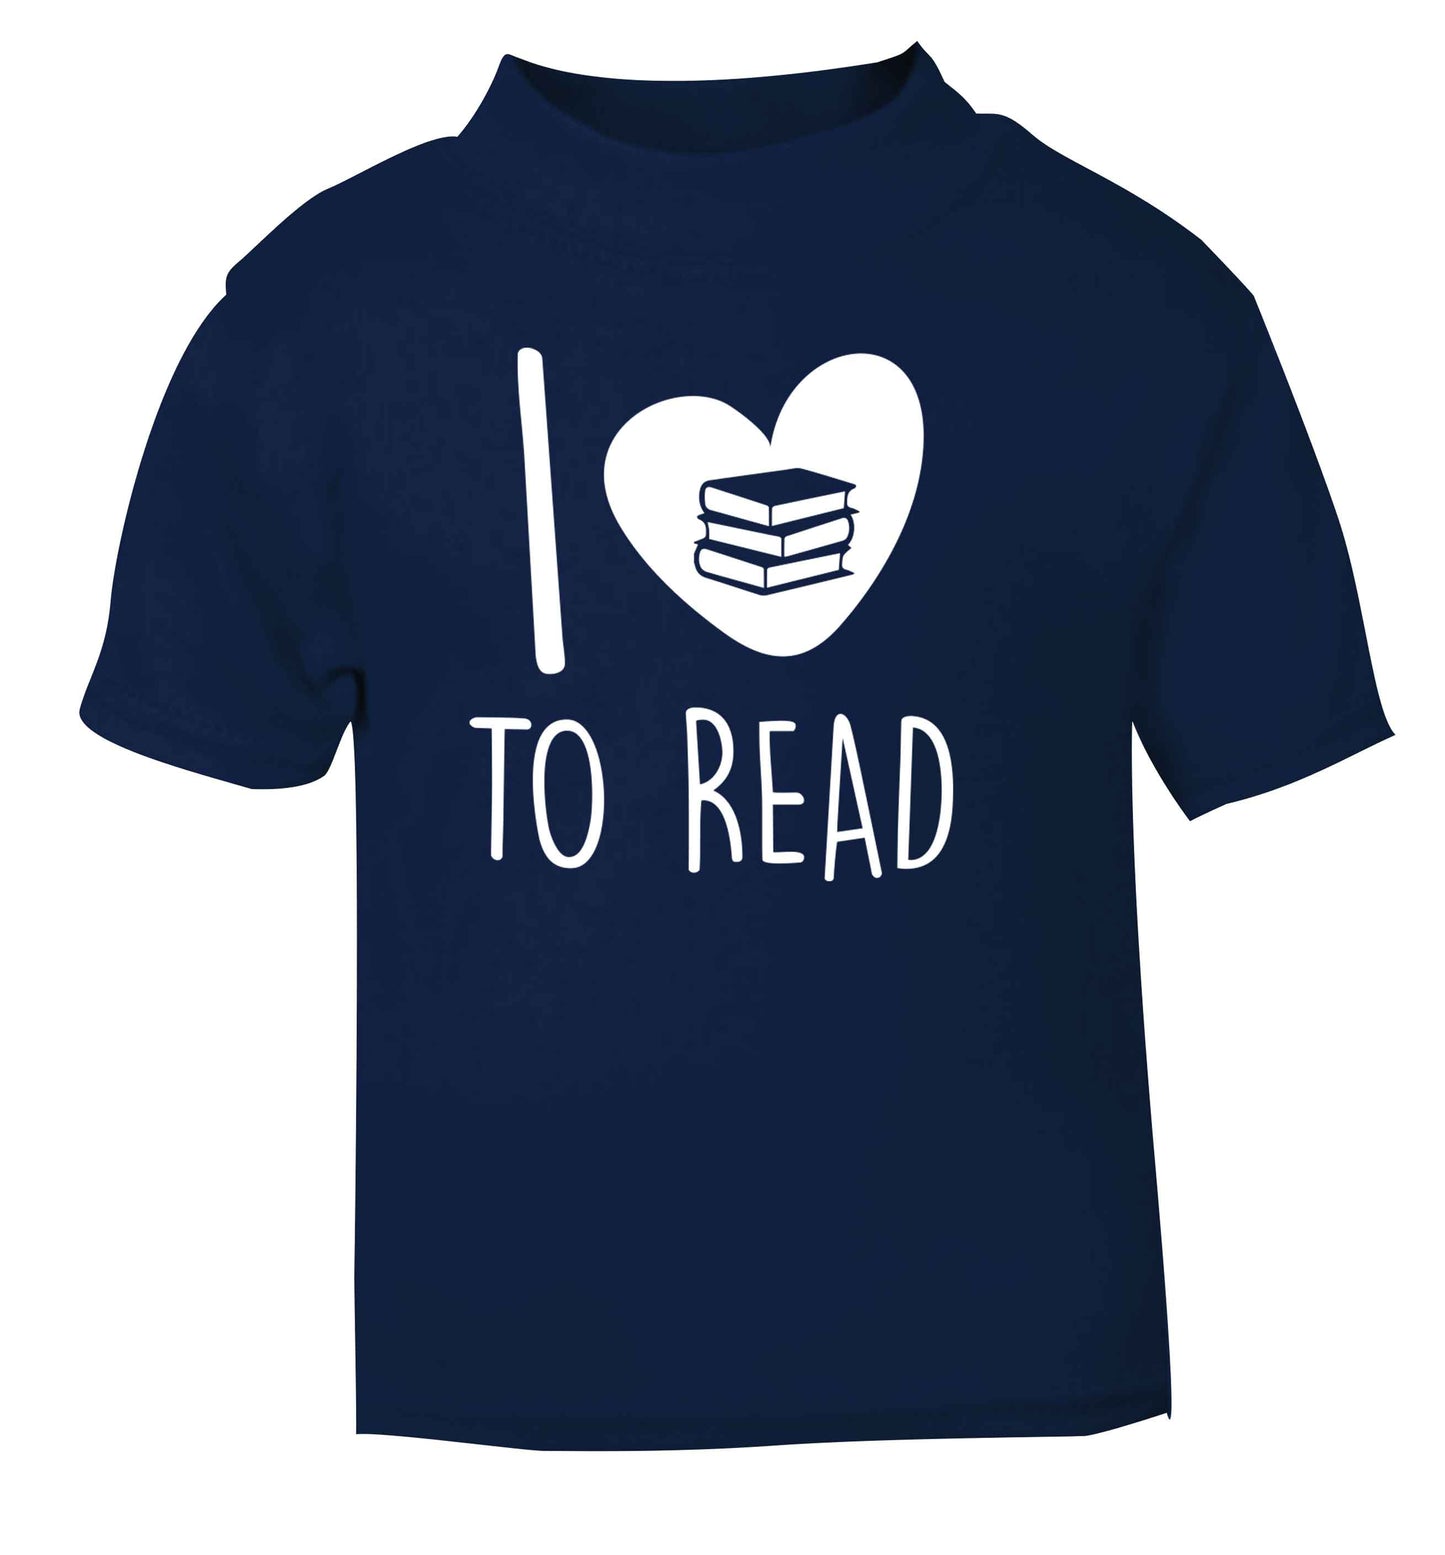 I love to read navy Baby Toddler Tshirt 2 Years